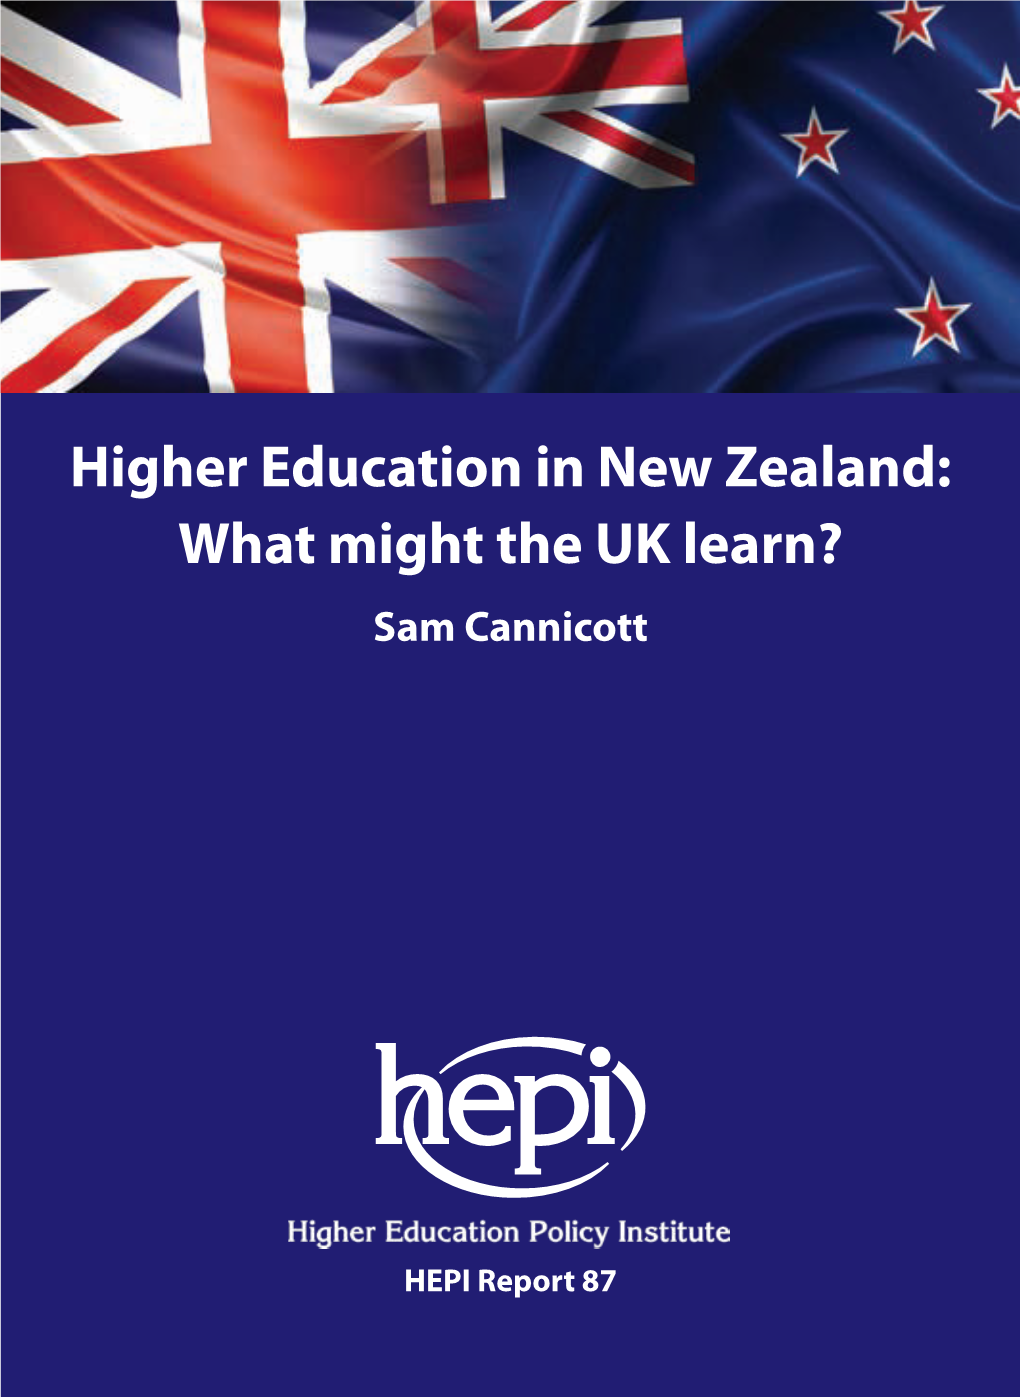 Higher Education in New Zealand: What Might the UK Learn? Sam Cannicott